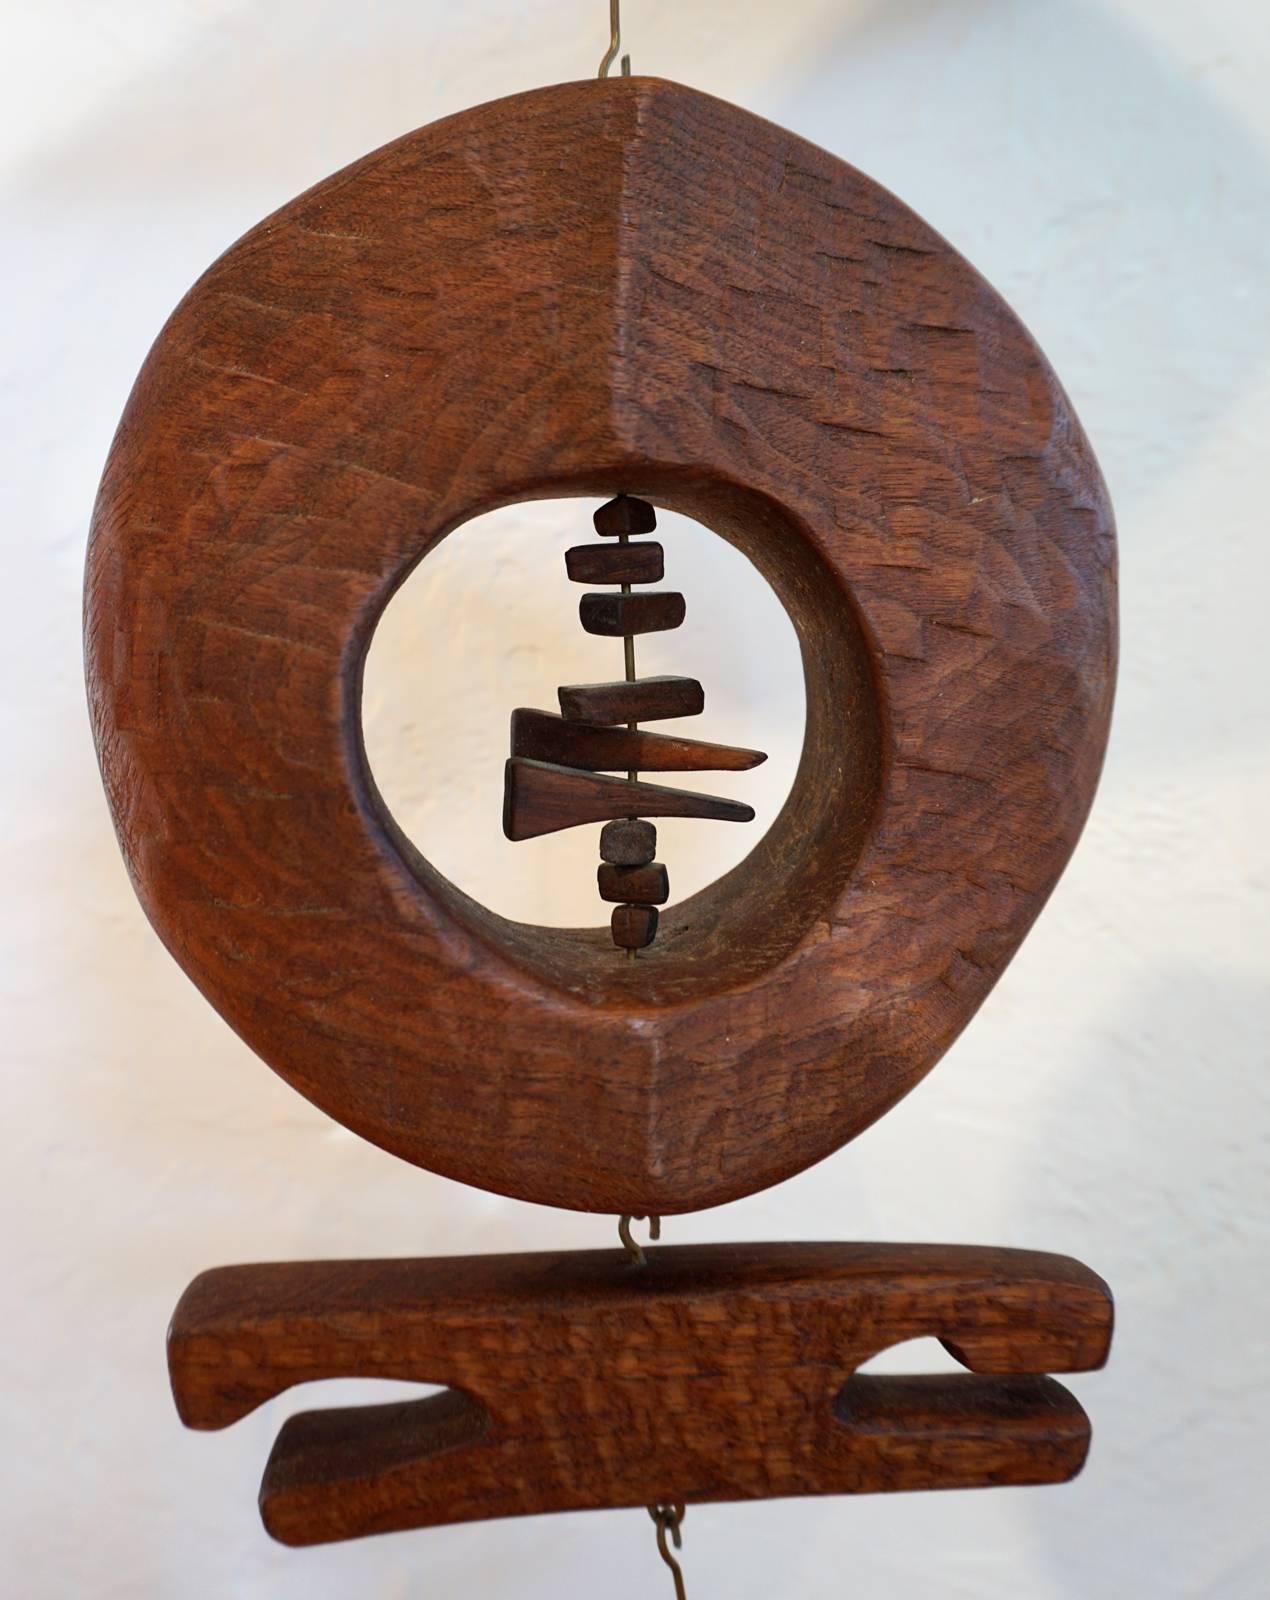 Carved 1960s Wood Mobile Sculpture by Kathy Haun